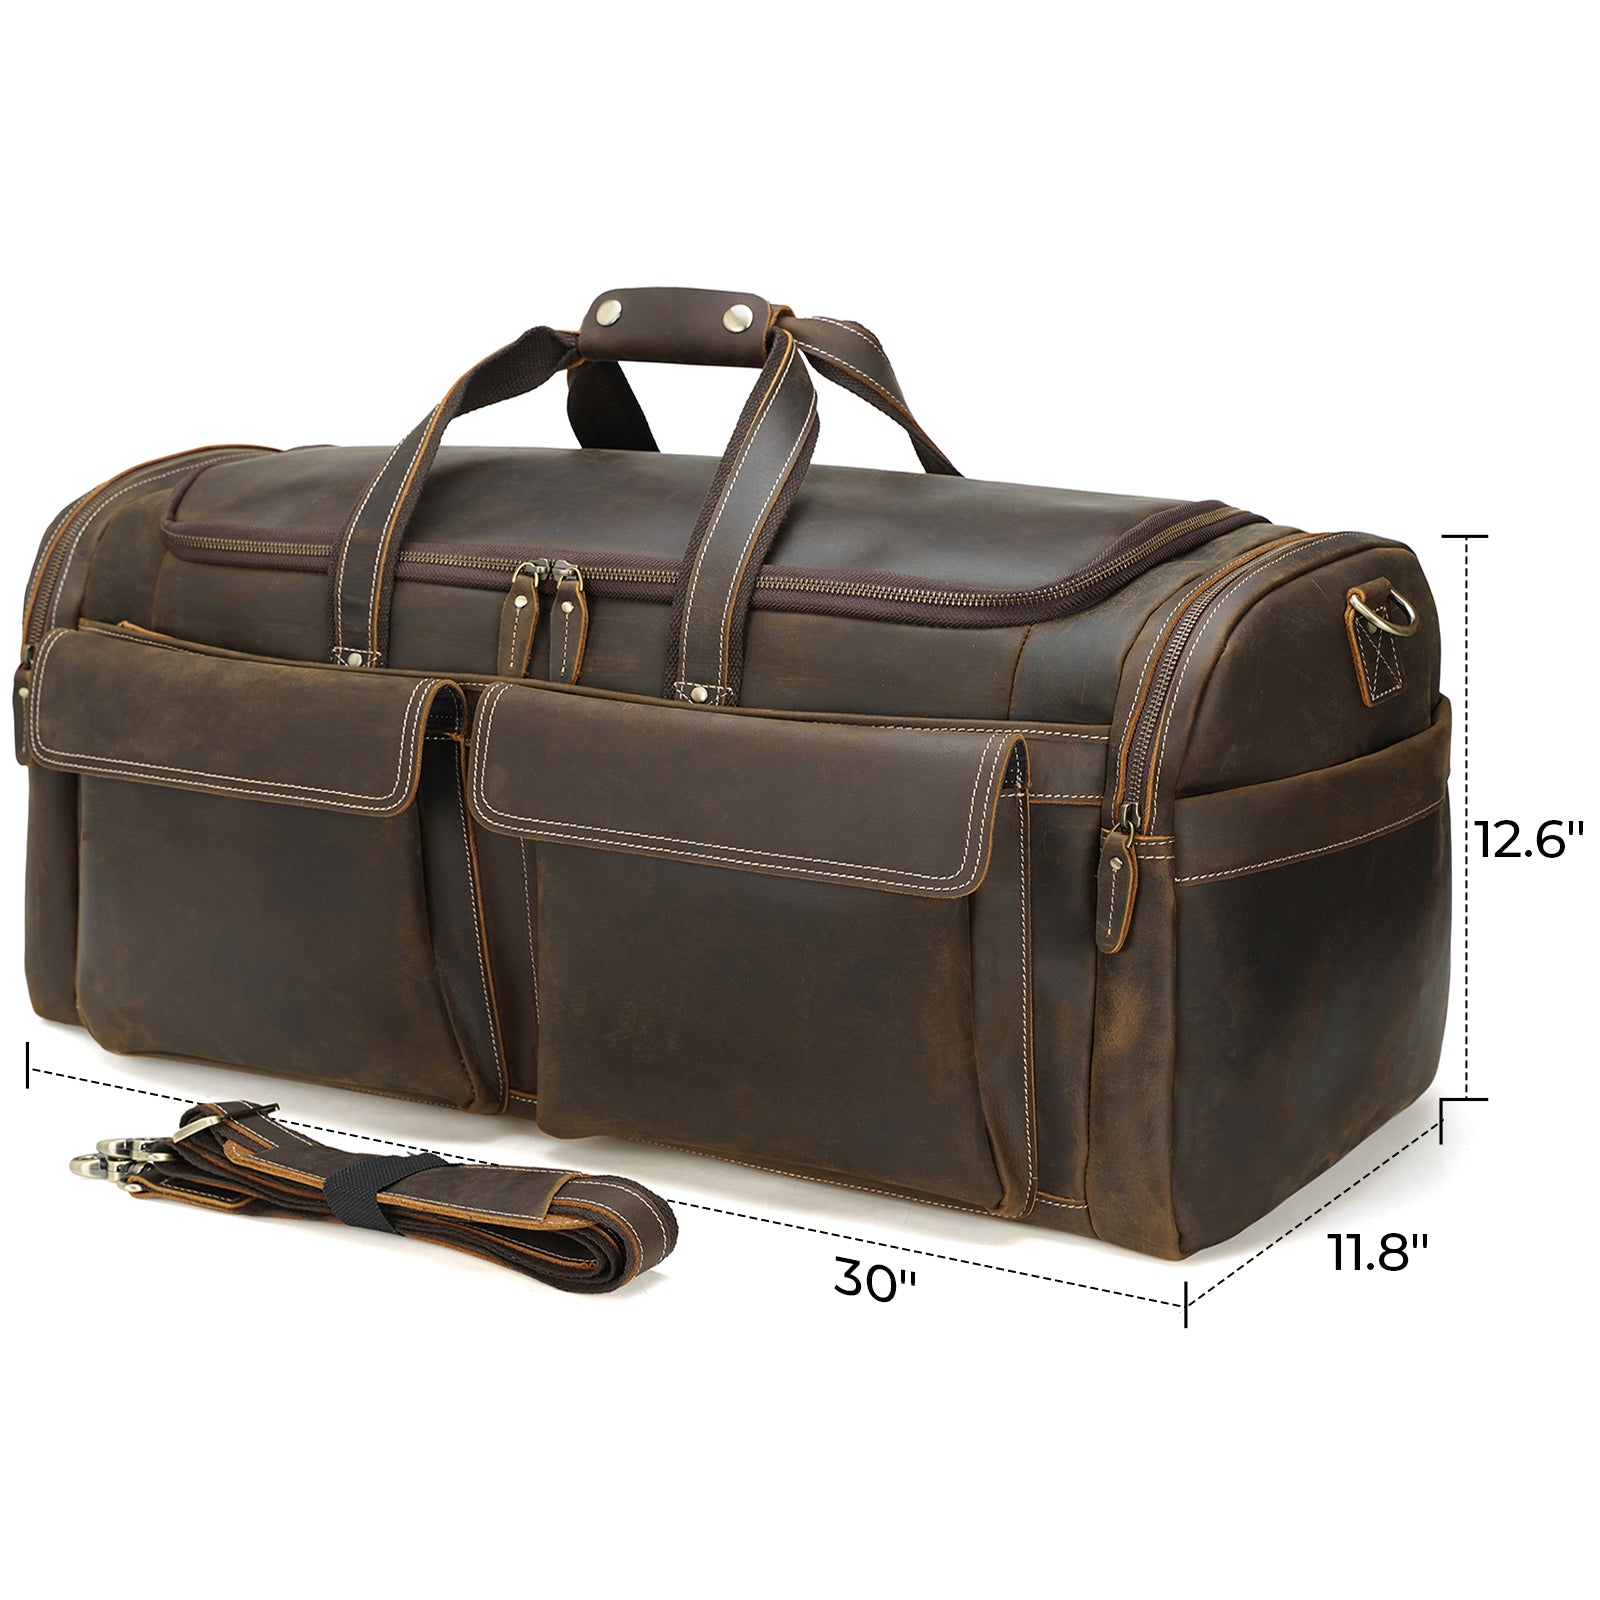 Polare Full Grain Leather Large Duffle Weekender Overnight Travel Bag (30"Dimension)